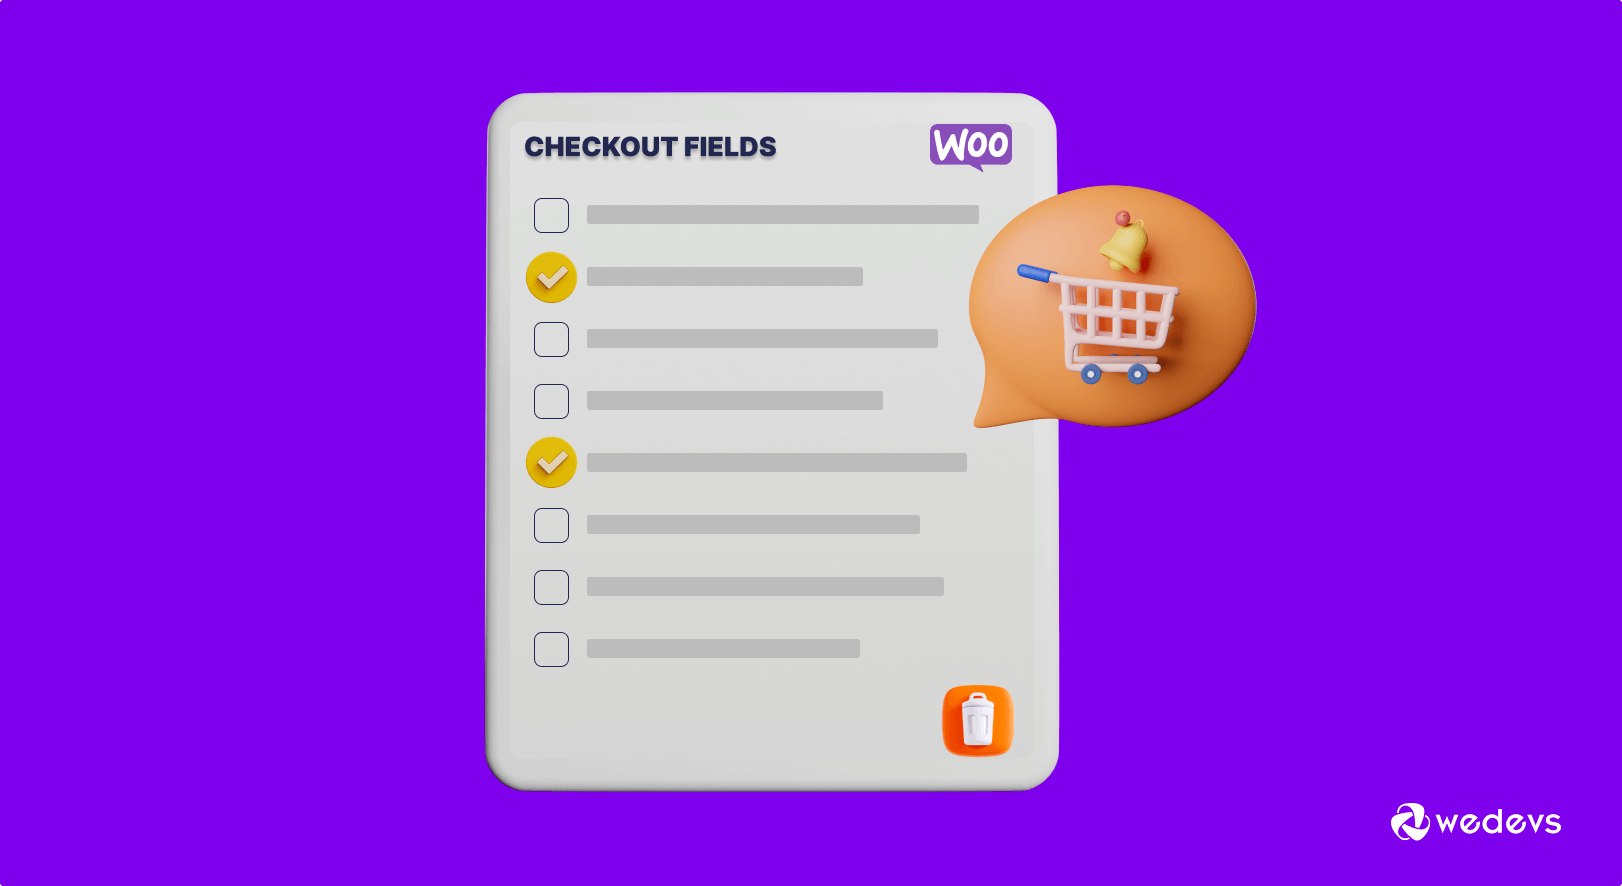 How to Enable WooCommerce Direct Checkout: 3 Easy Methods